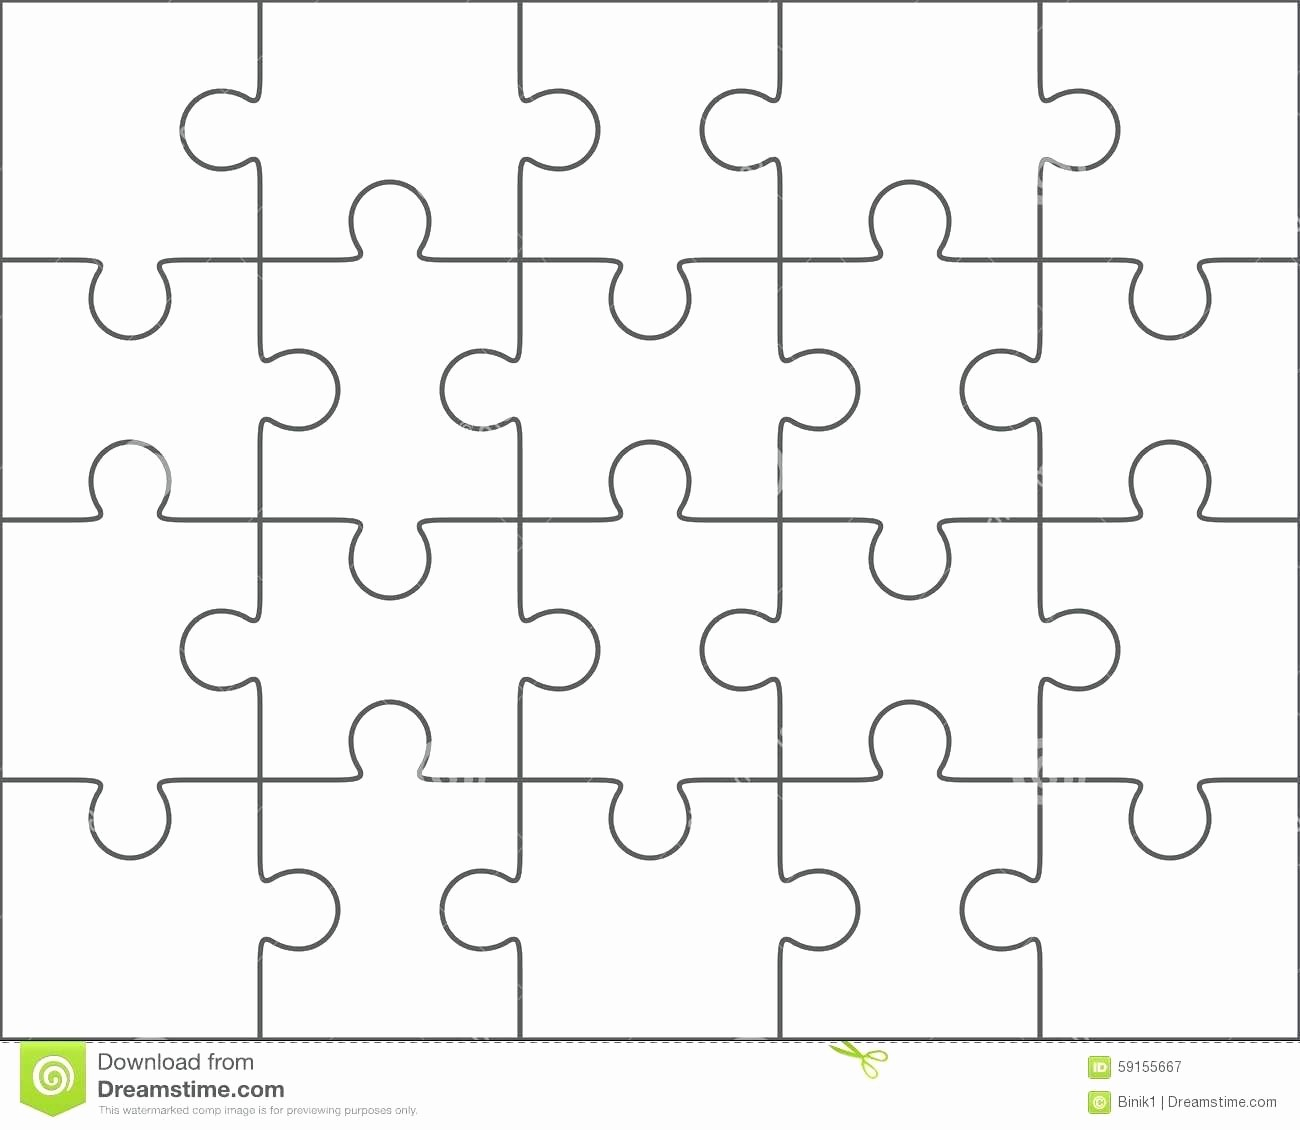 030 Puzzle Pieces Template For Word Best Of Piece Intended Intended For Blank Jigsaw Piece Template